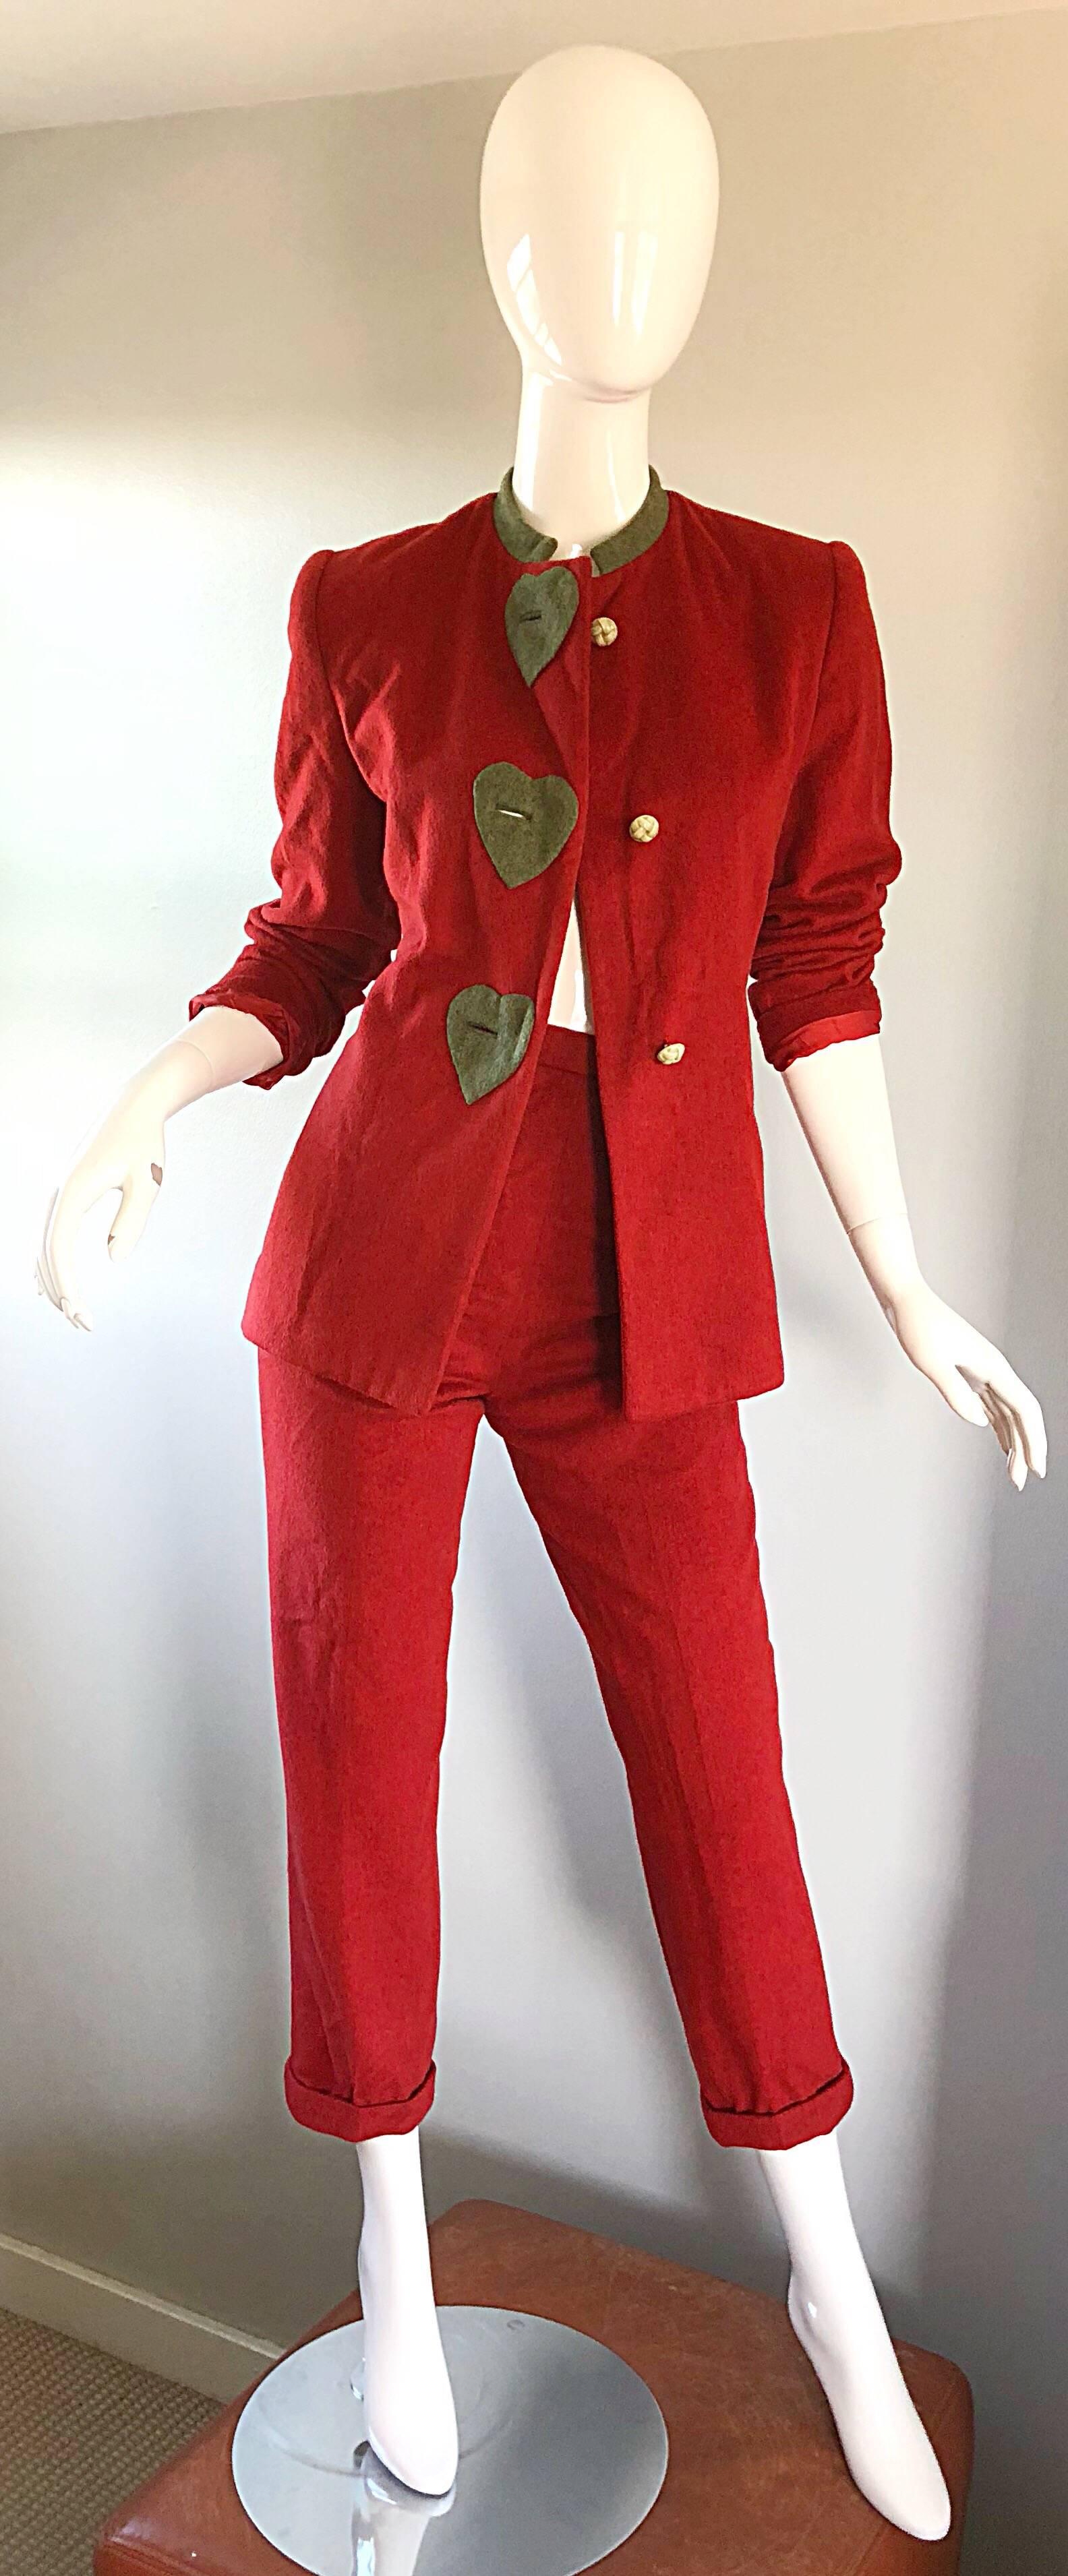 Carolina Herrera Rare Early 1990s Size 6 Brick Red Novelty Heart Print Pant Suit In Excellent Condition For Sale In San Diego, CA